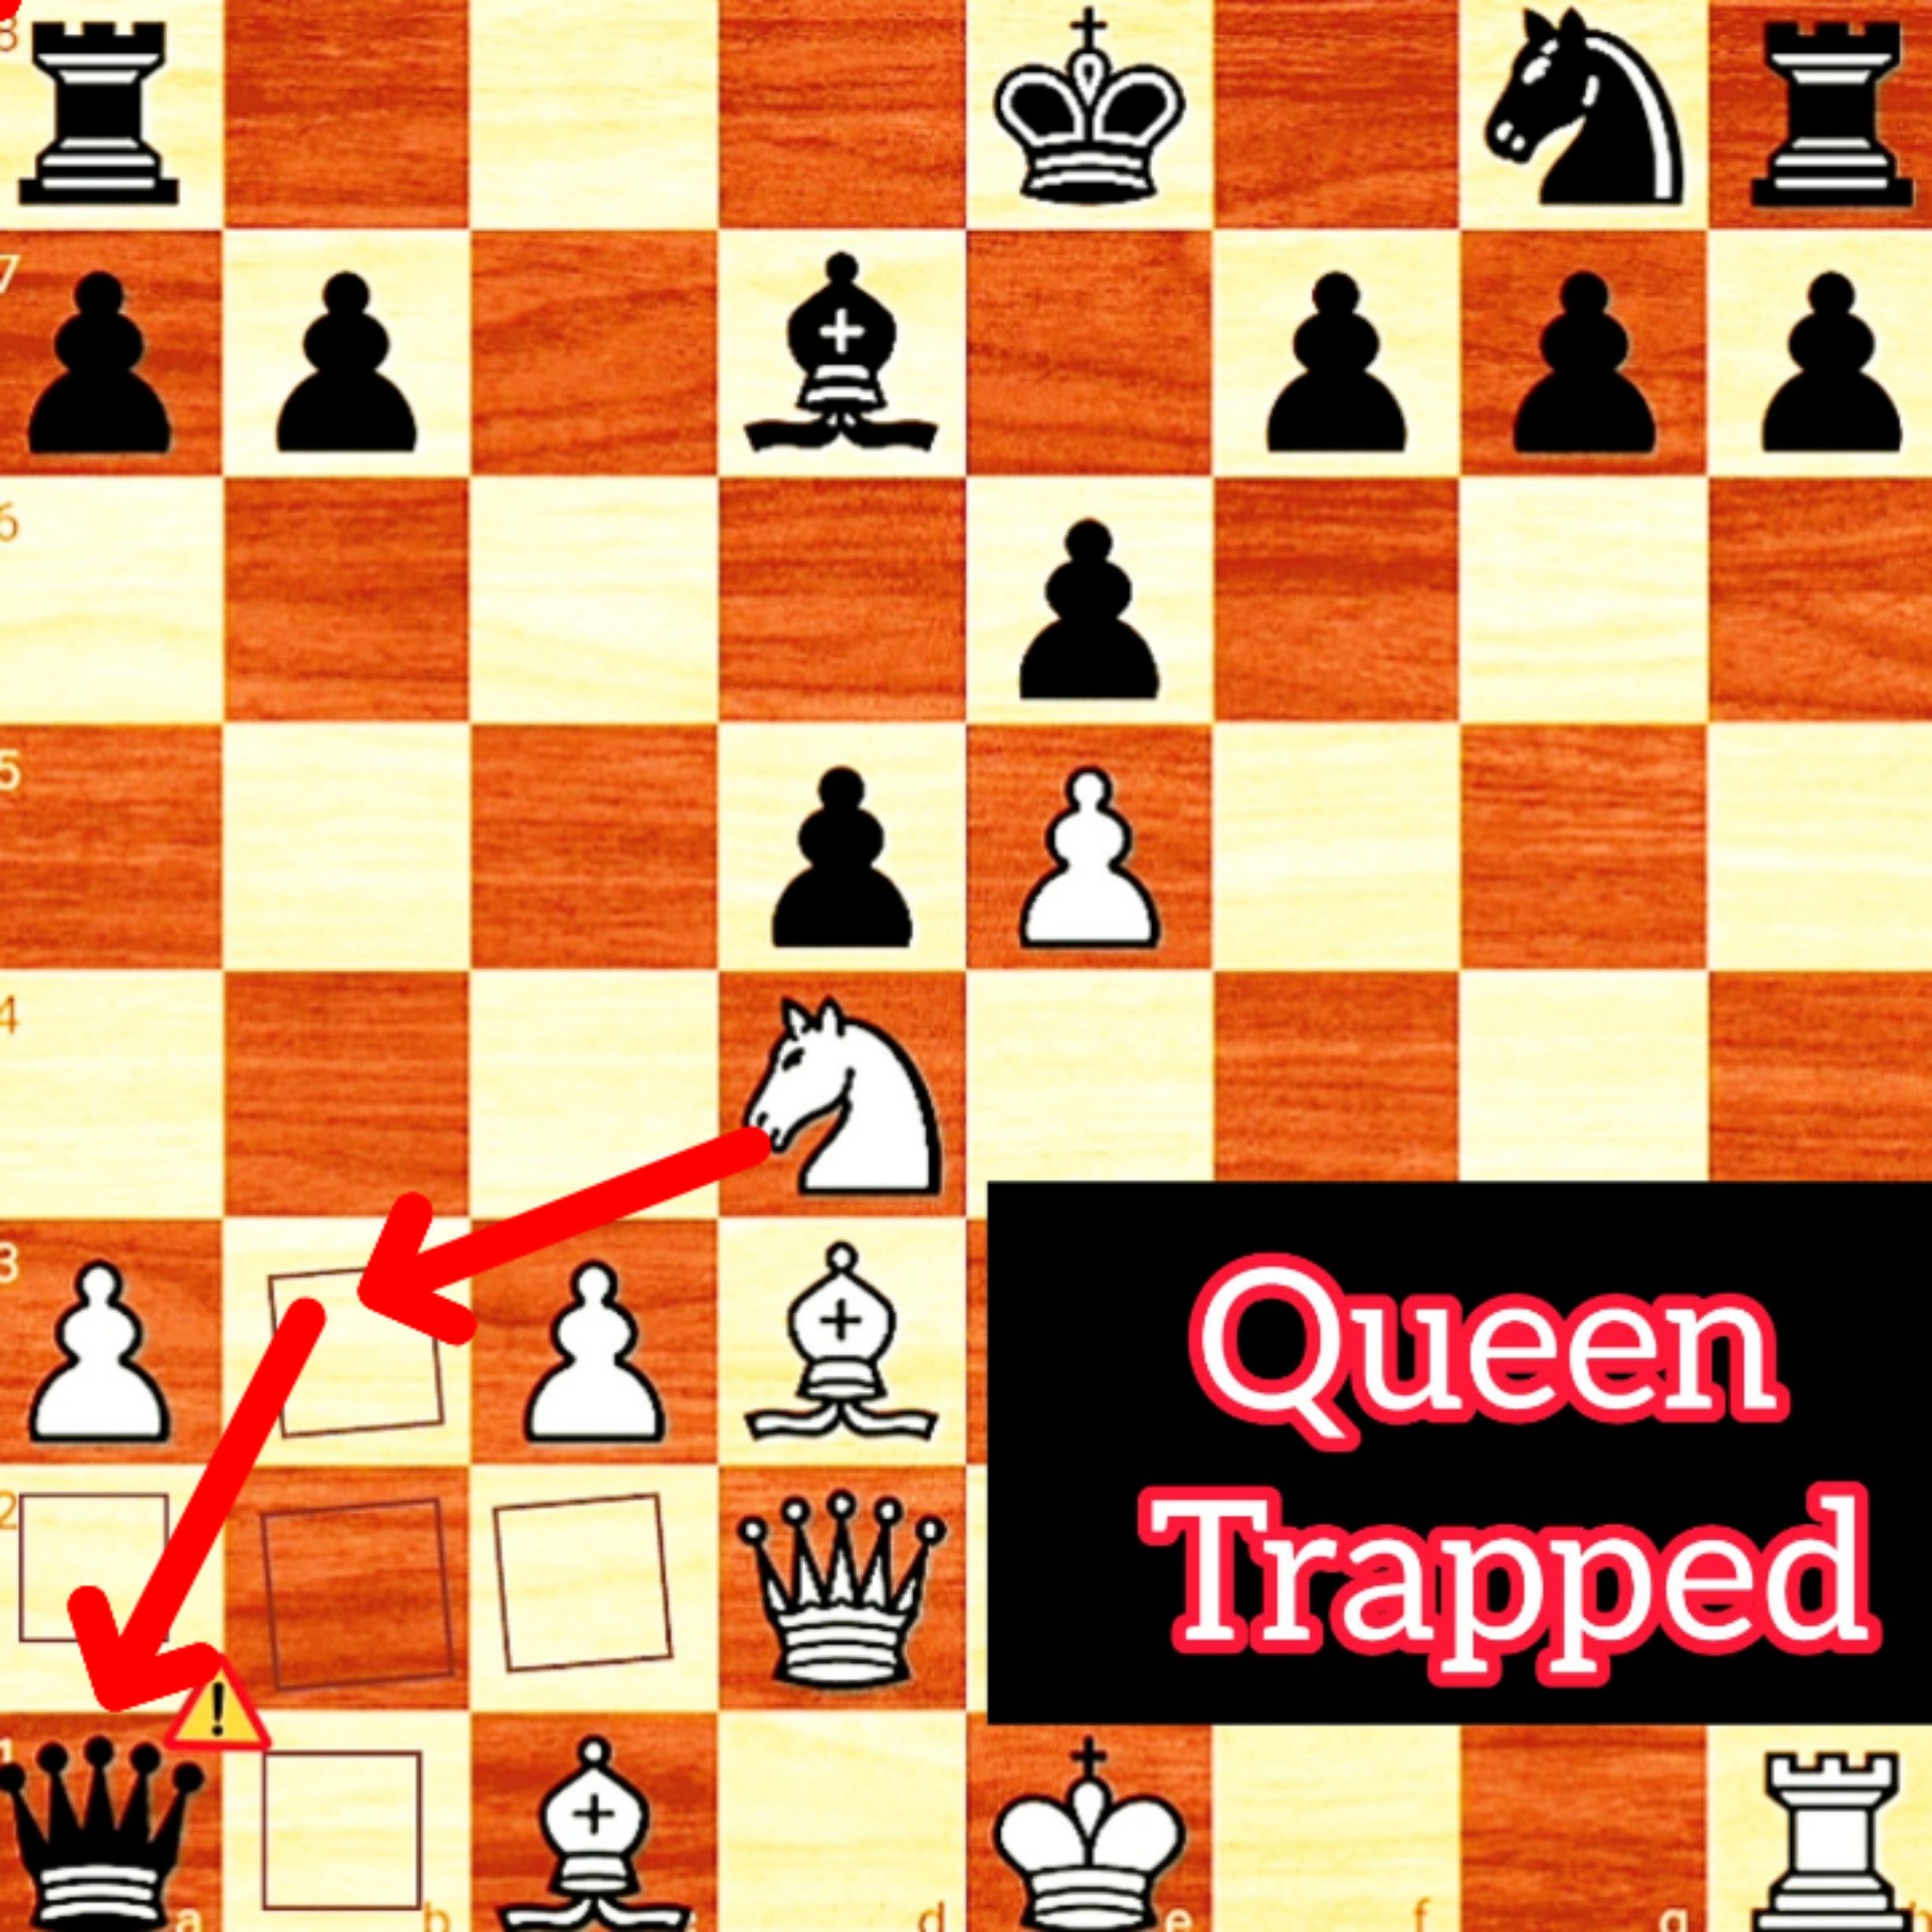 Did I pronounce that right?? Double Tap ❤️ for more chess tricks, trap